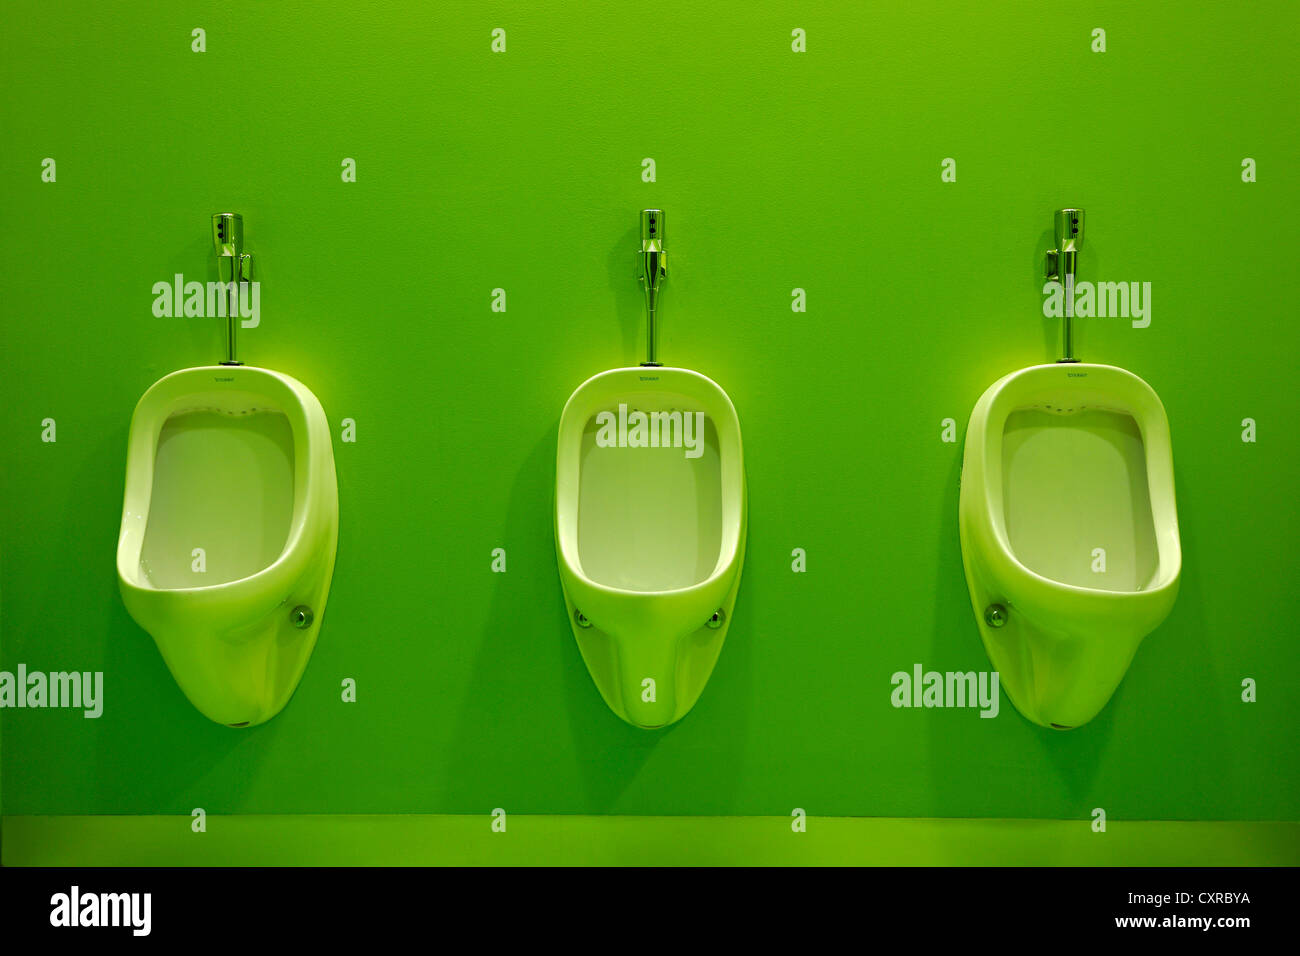 Green toilets, urinals, Madrid, Spain, Europe Stock Photo